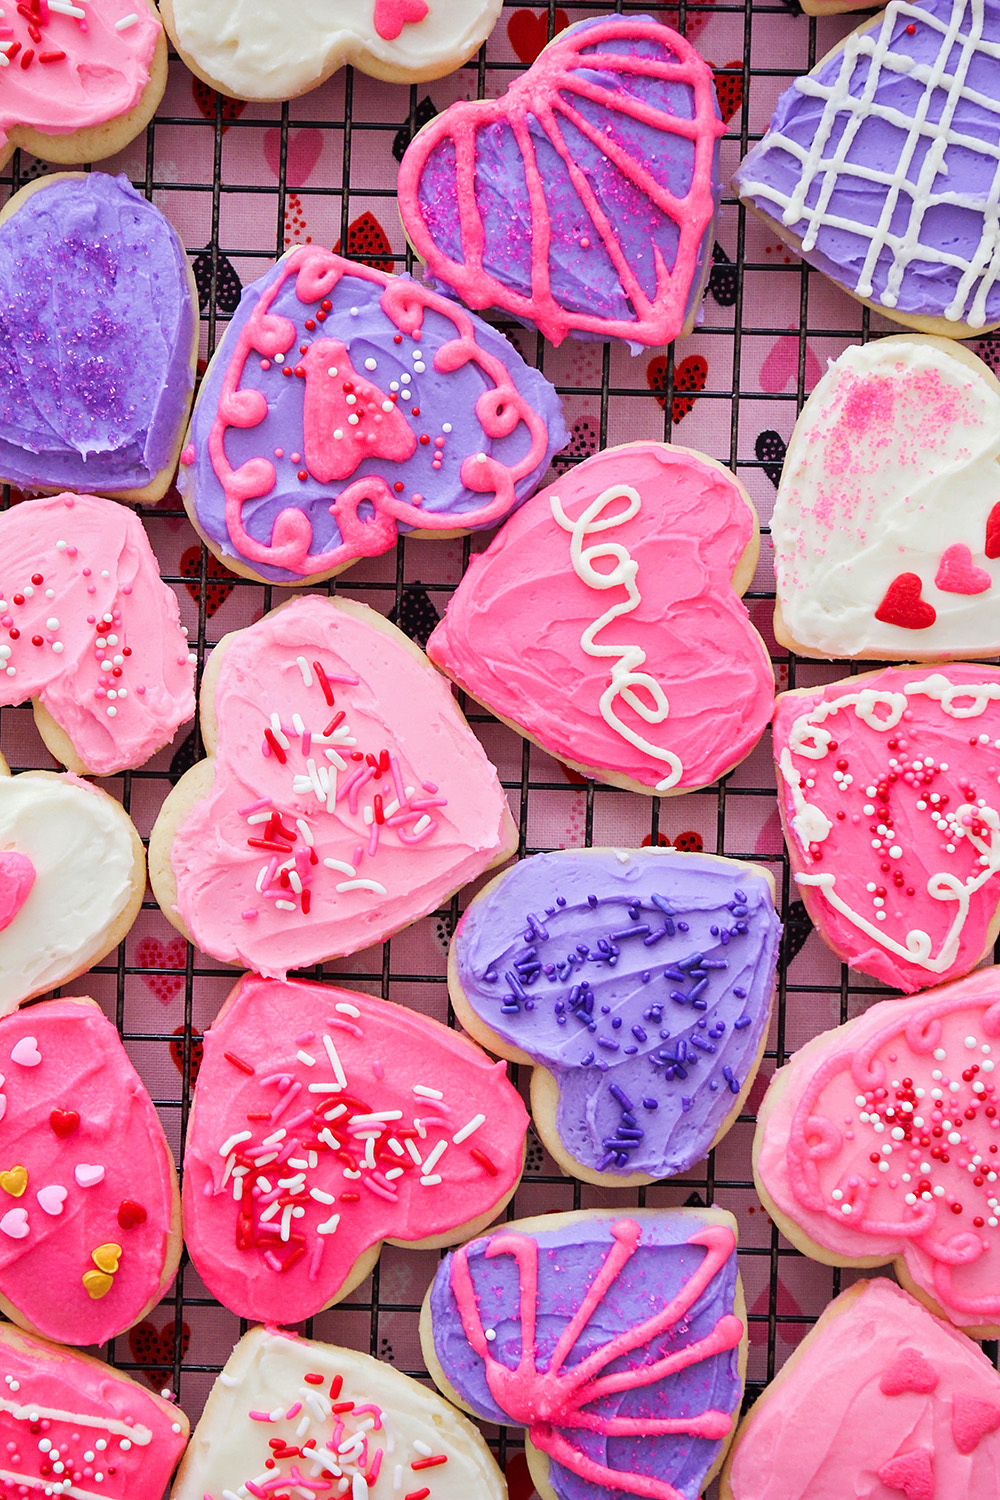 This simple and fun Valentine's Day cookie party is the perfect way to make some sweet memories with your little ones! 